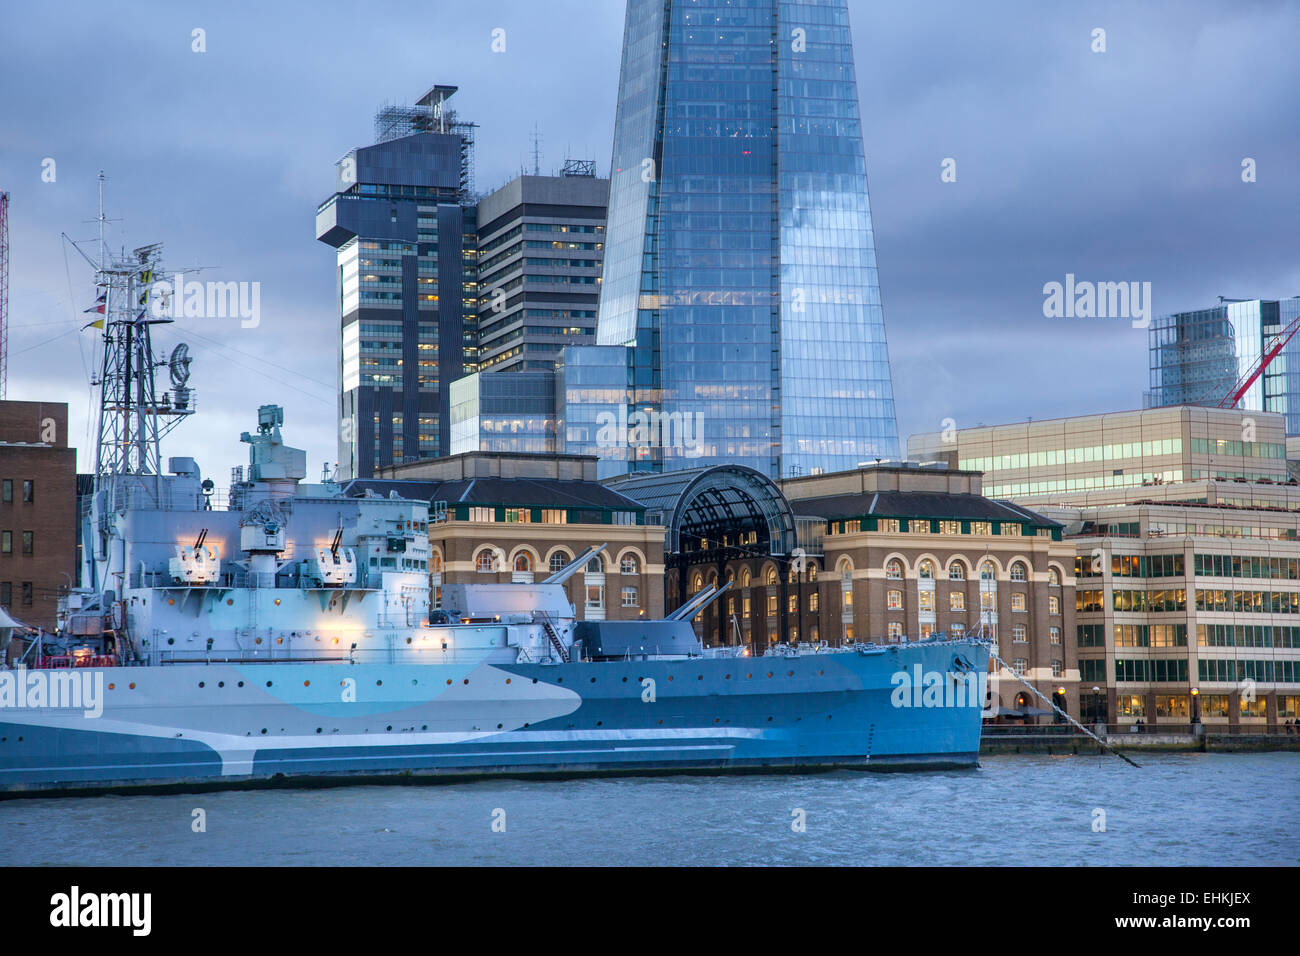 HMS Belfast with The Shard in the background River Thames London Stock Photo